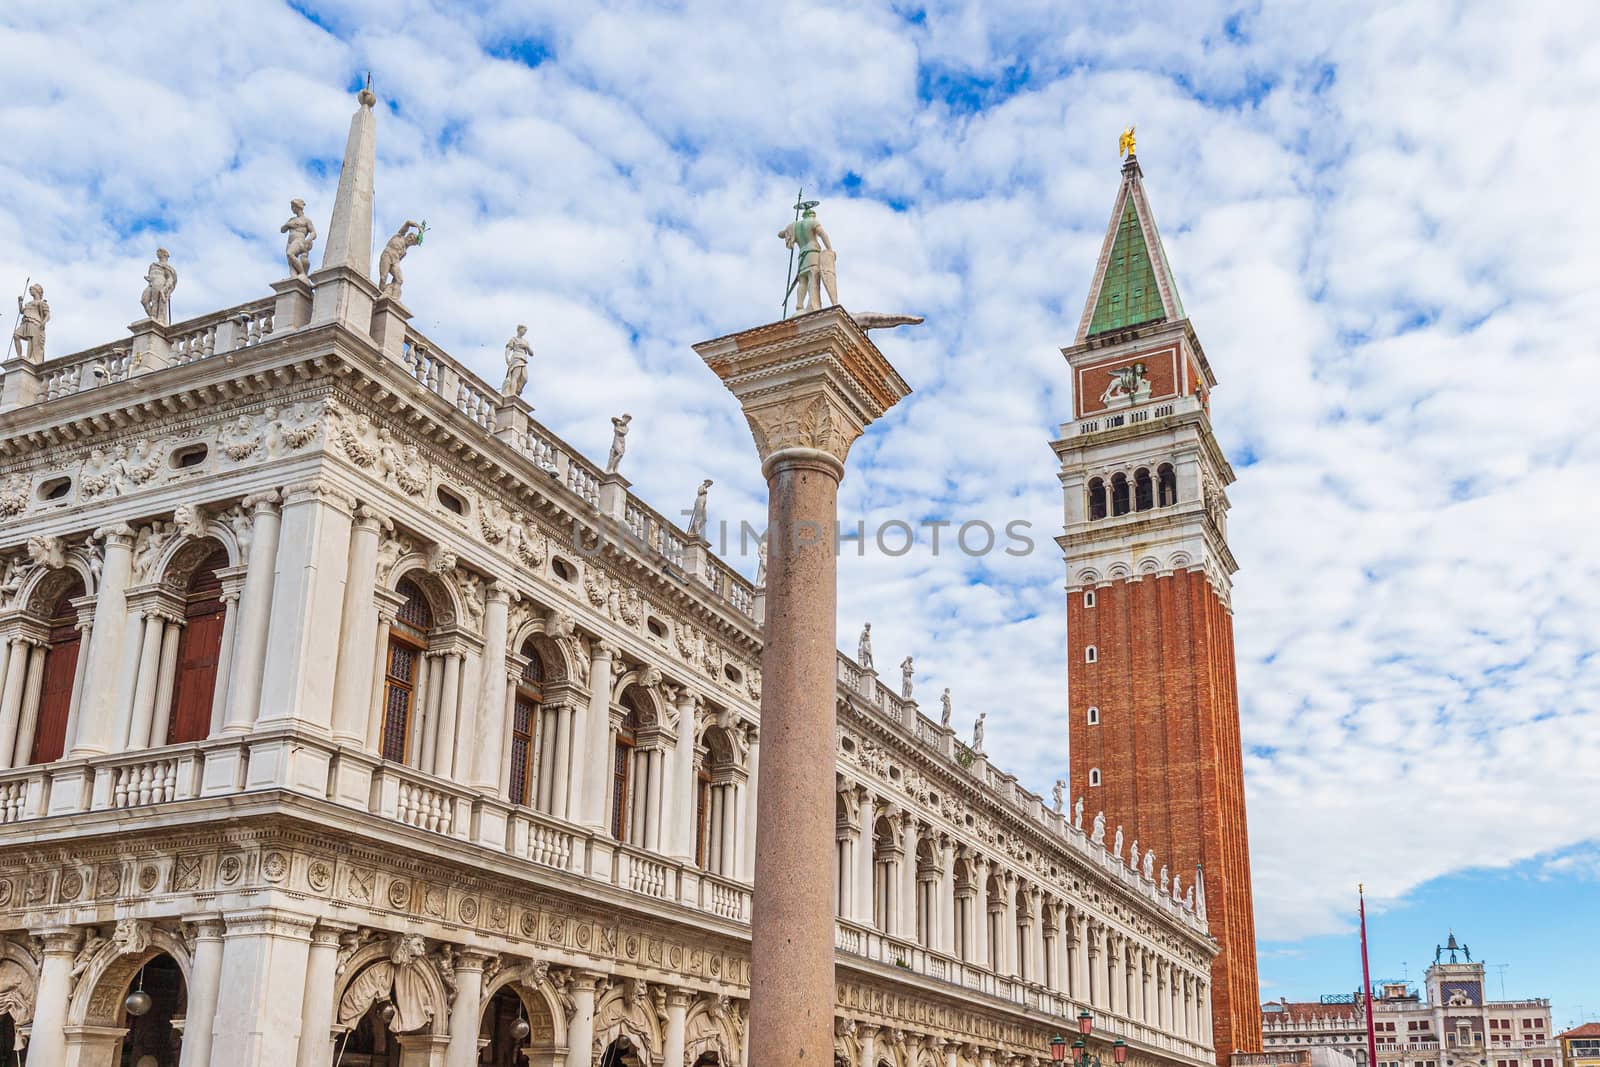 A view of the Campanile at St Mark's Square in Venice, Italy by COffe